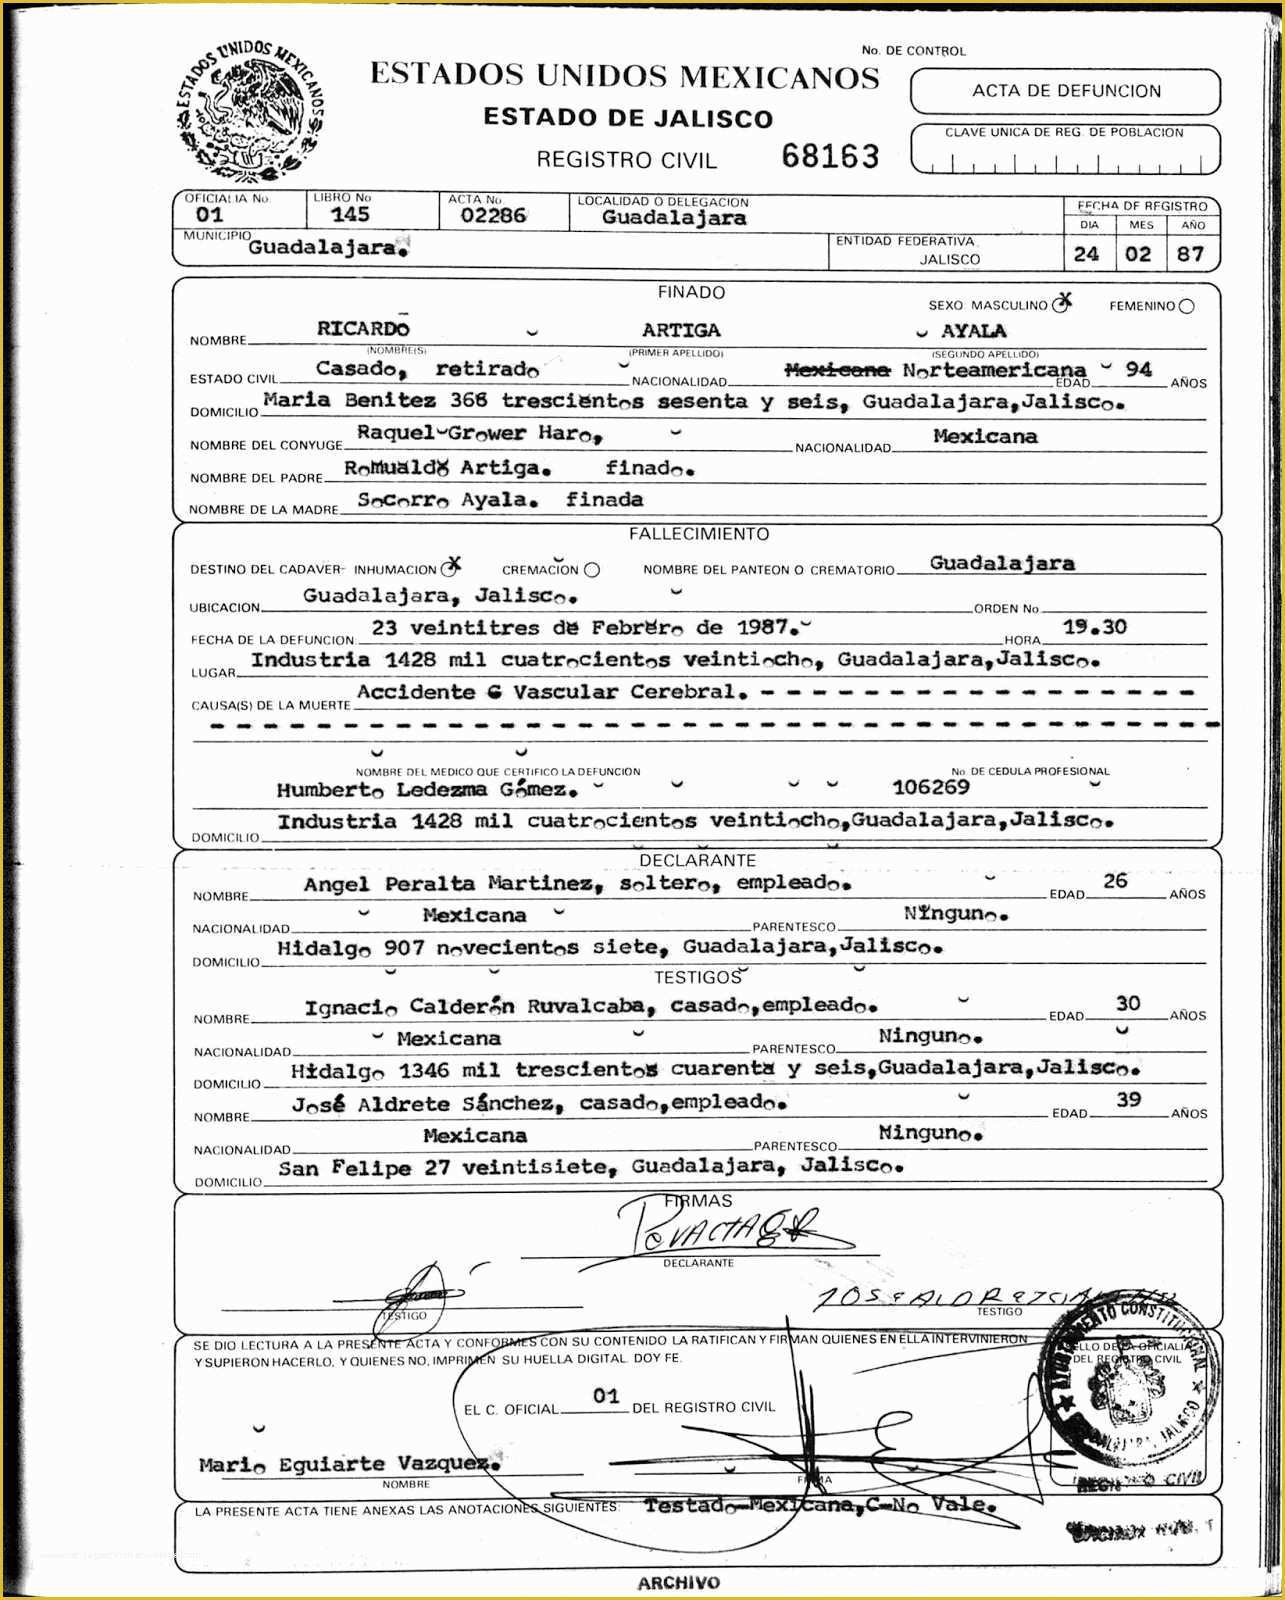 Free Death Certificate Translation Template Of El Salvador Birth Certificate Great El Salvador Birth